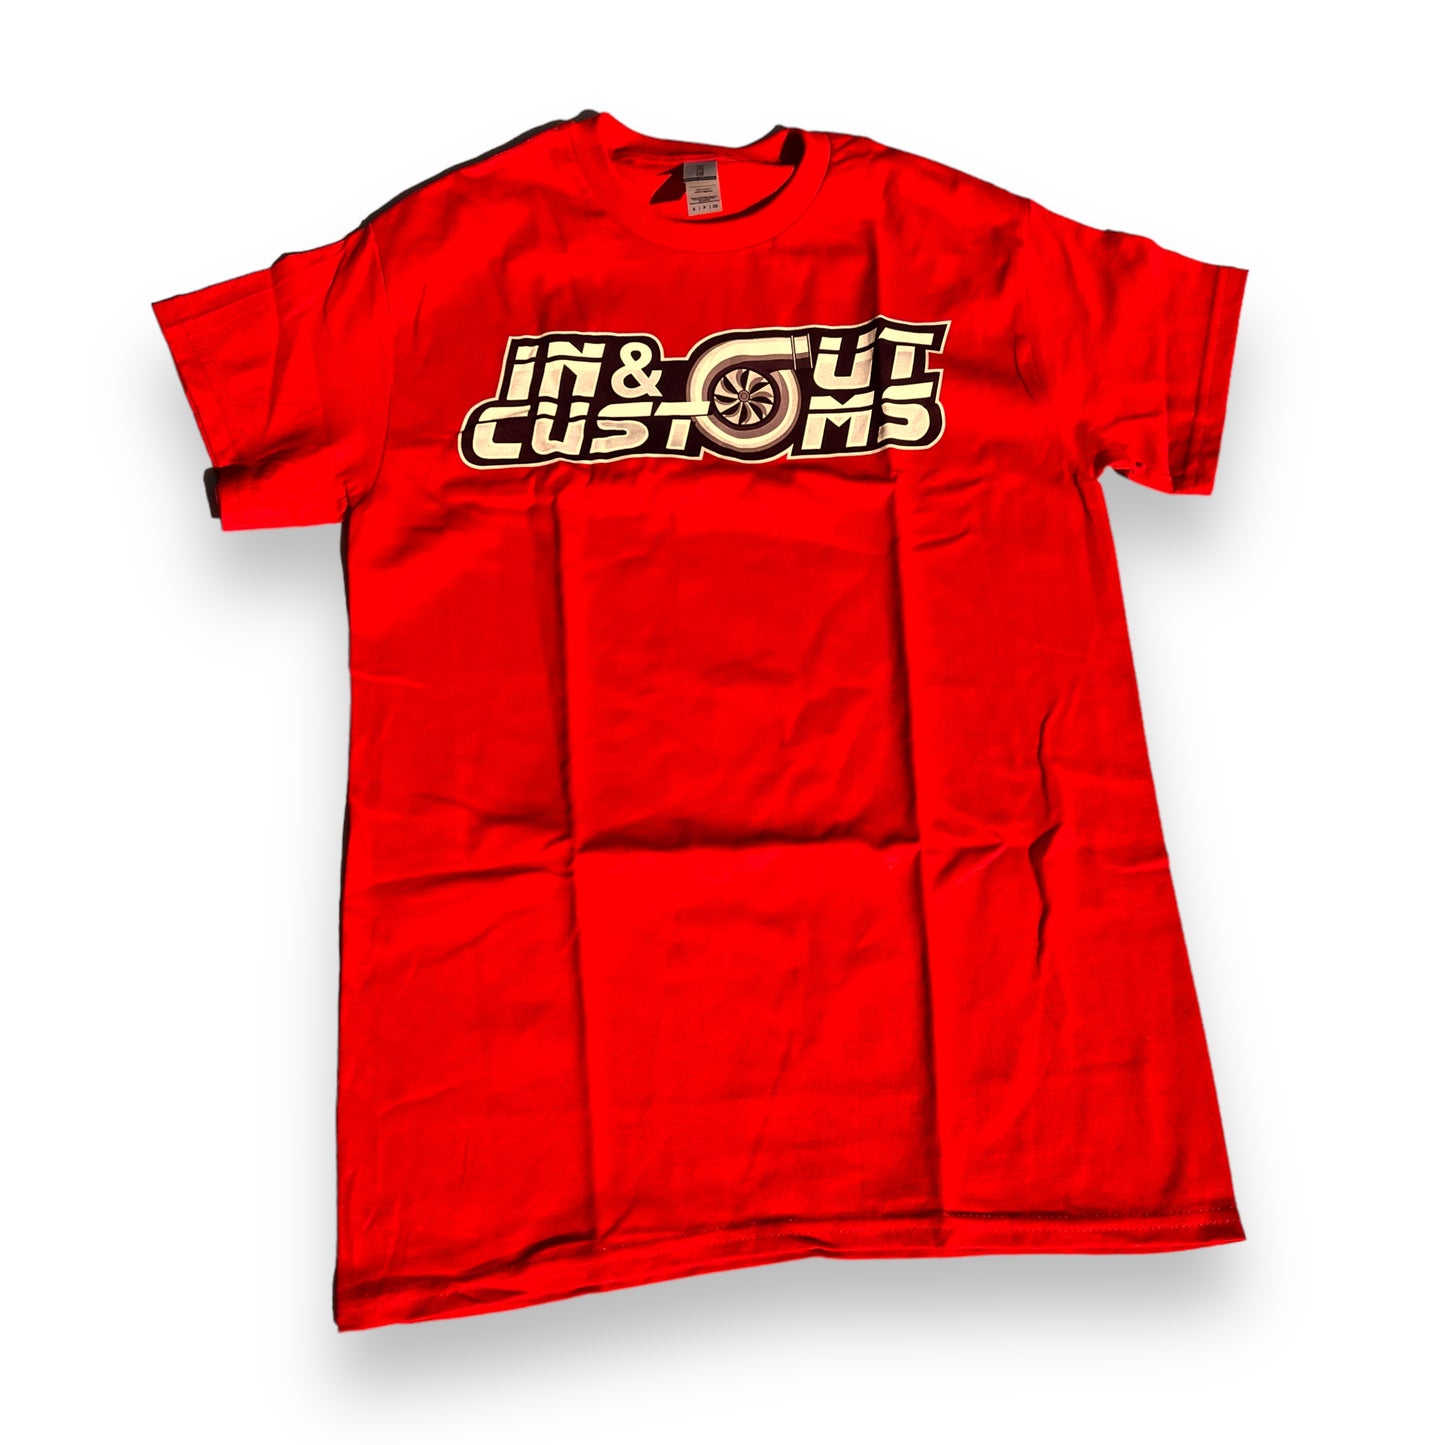 Donkmaster "In And Out Customs" Red Tee